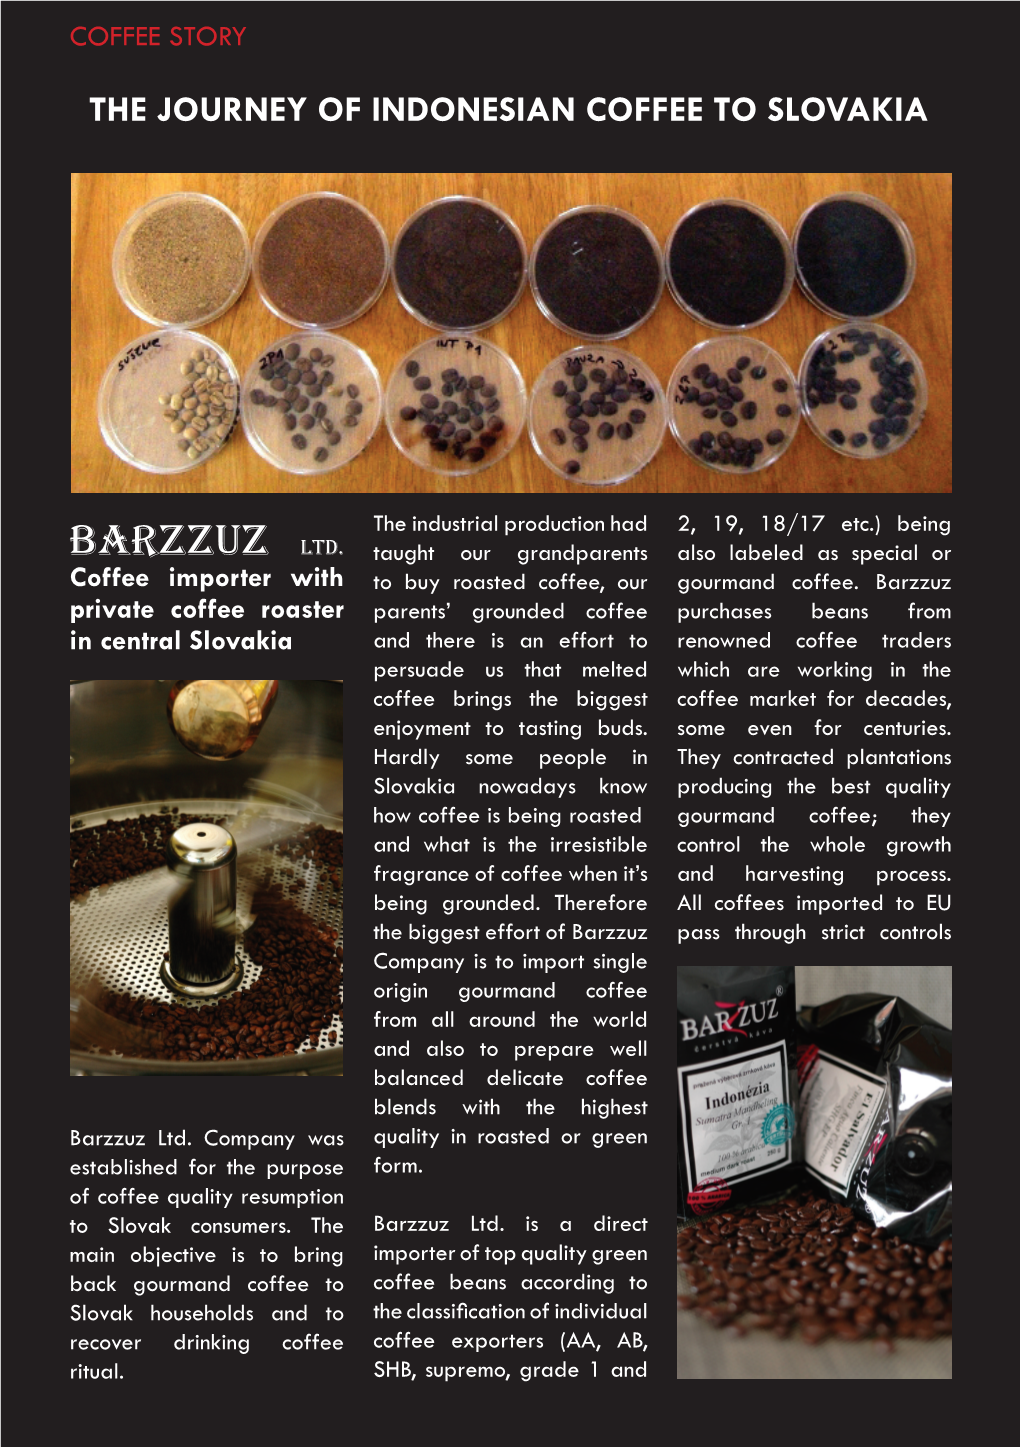 Barzzuz Ltd. Taught Our Grandparents Also Labeled As Special Or Coffee Importer with to Buy Roasted Coffee, Our Gourmand Coffee